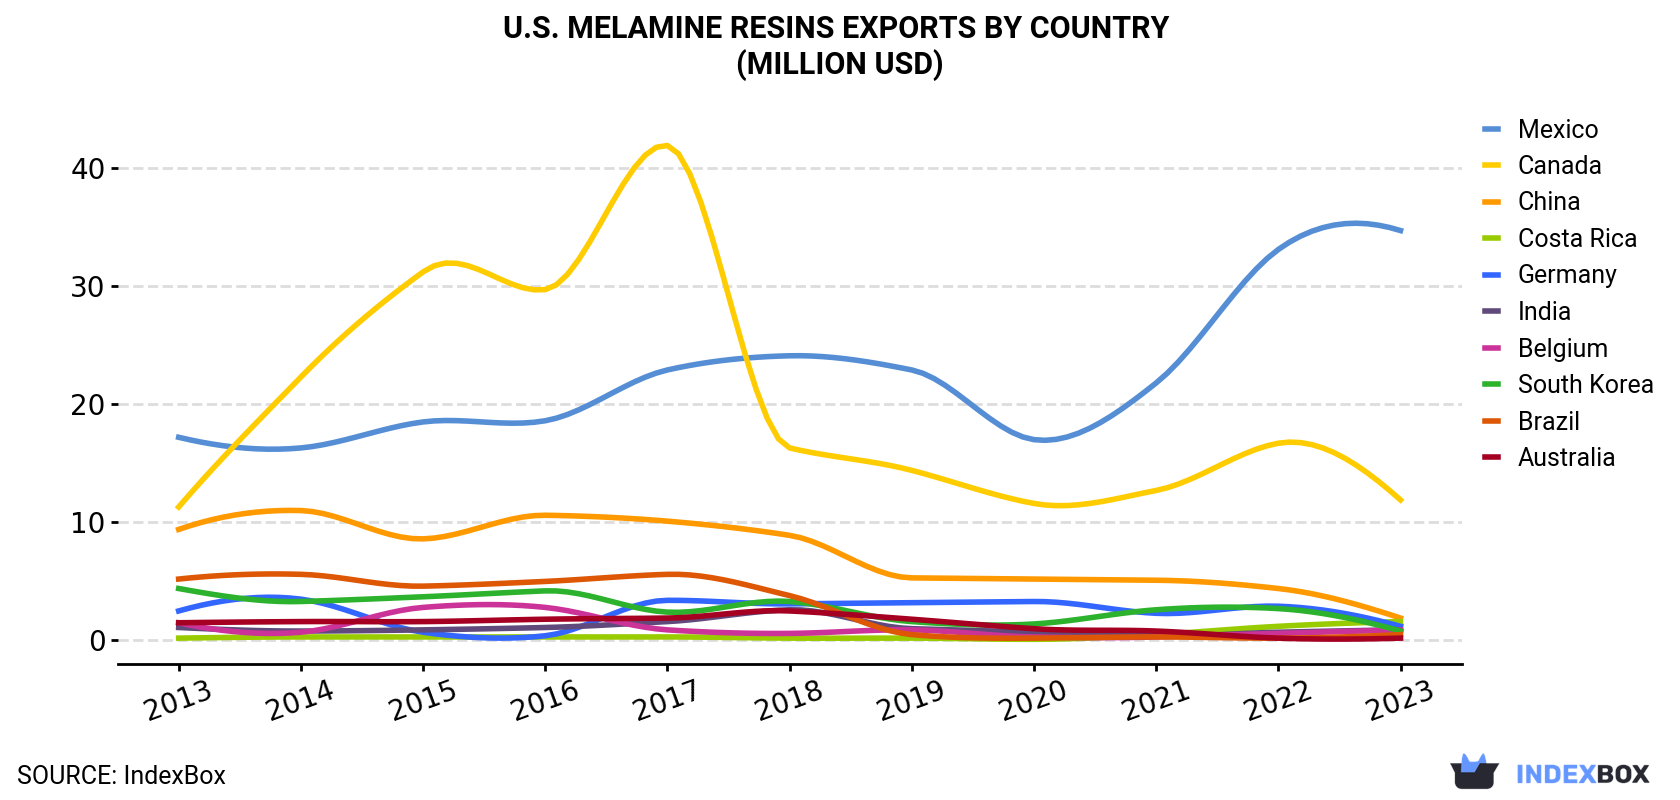 U.S. Melamine Resins Exports By Country (Million USD)